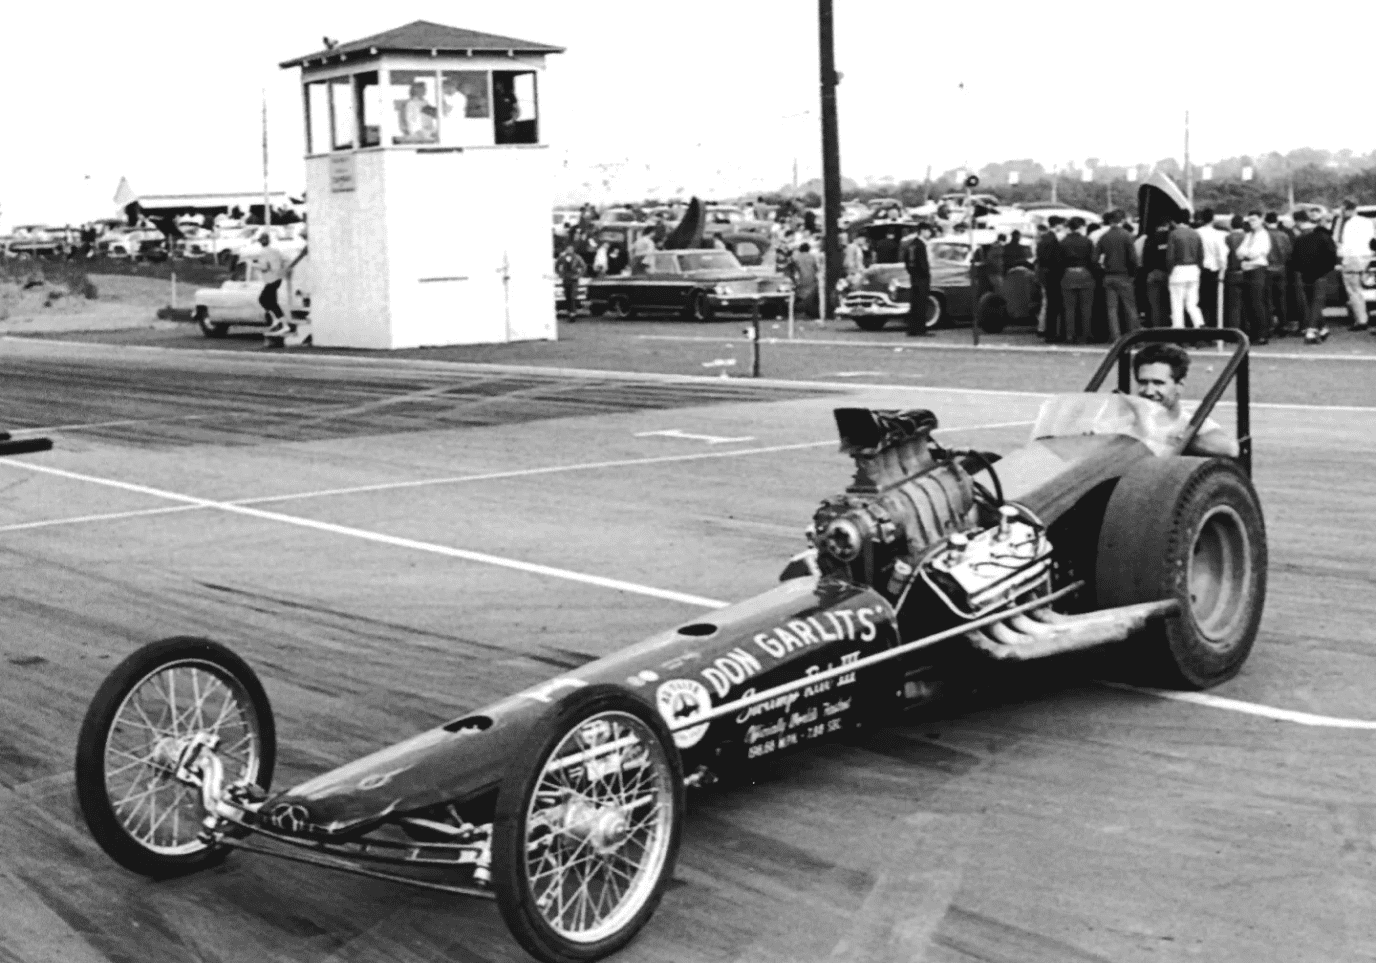 The first aircraft tubing car to come out of Garlits’ Automotive. Big Daddy built the frame for Swamp Rat III, and Connie Swingle began manufacturing them for customers for the whopping sum of $300.00 each. Swingle, who was from Bixby, Oklahoma, put the Swamp Rat III into the record books at Thompson, Ohio at 198.66 MPH and 7.88 seconds ET at Columbia, SC. Then on a fantastic run at Emporia, Virginia, the chute failed, and Swingle hit the pine trees at the end and destroyed the car, breaking several of his ribs in the process.